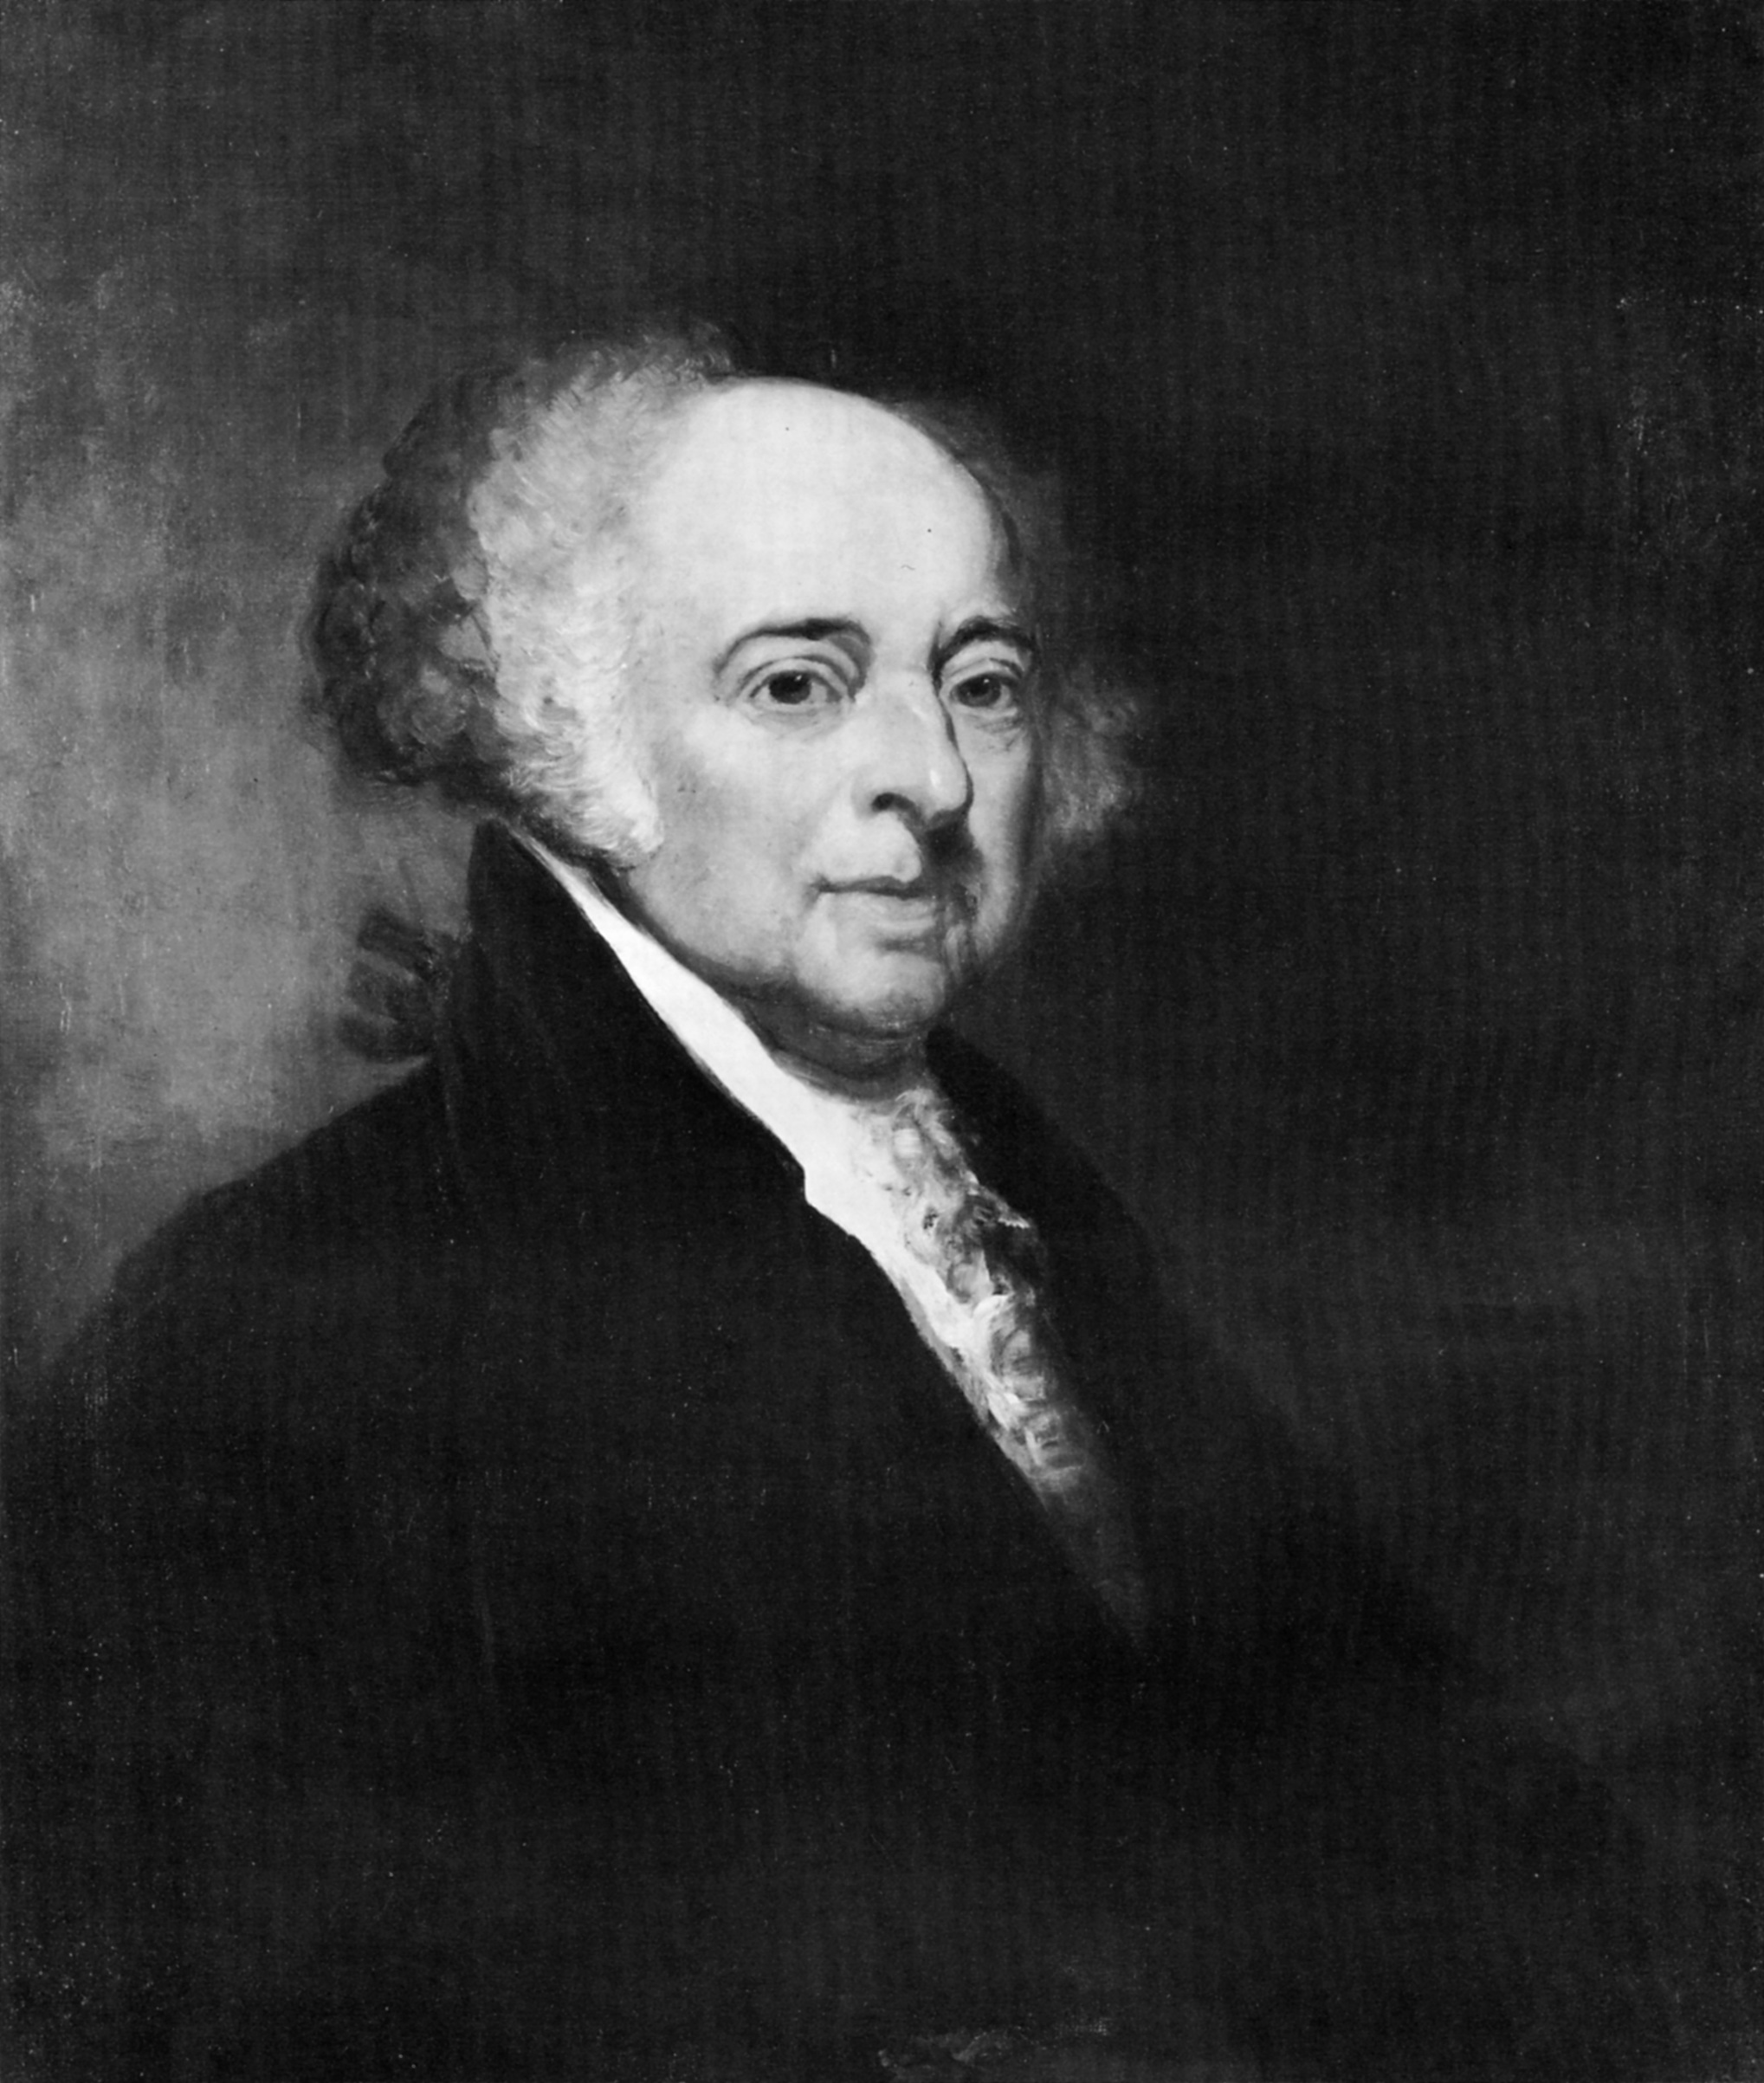 John Adams, second President of the United States, (20th century). Adams, (1735-1826) was president from 1797 until 1801. (Photo by The Print Collector/Print Collector/Getty Images) (Print Collector/Getty Images)